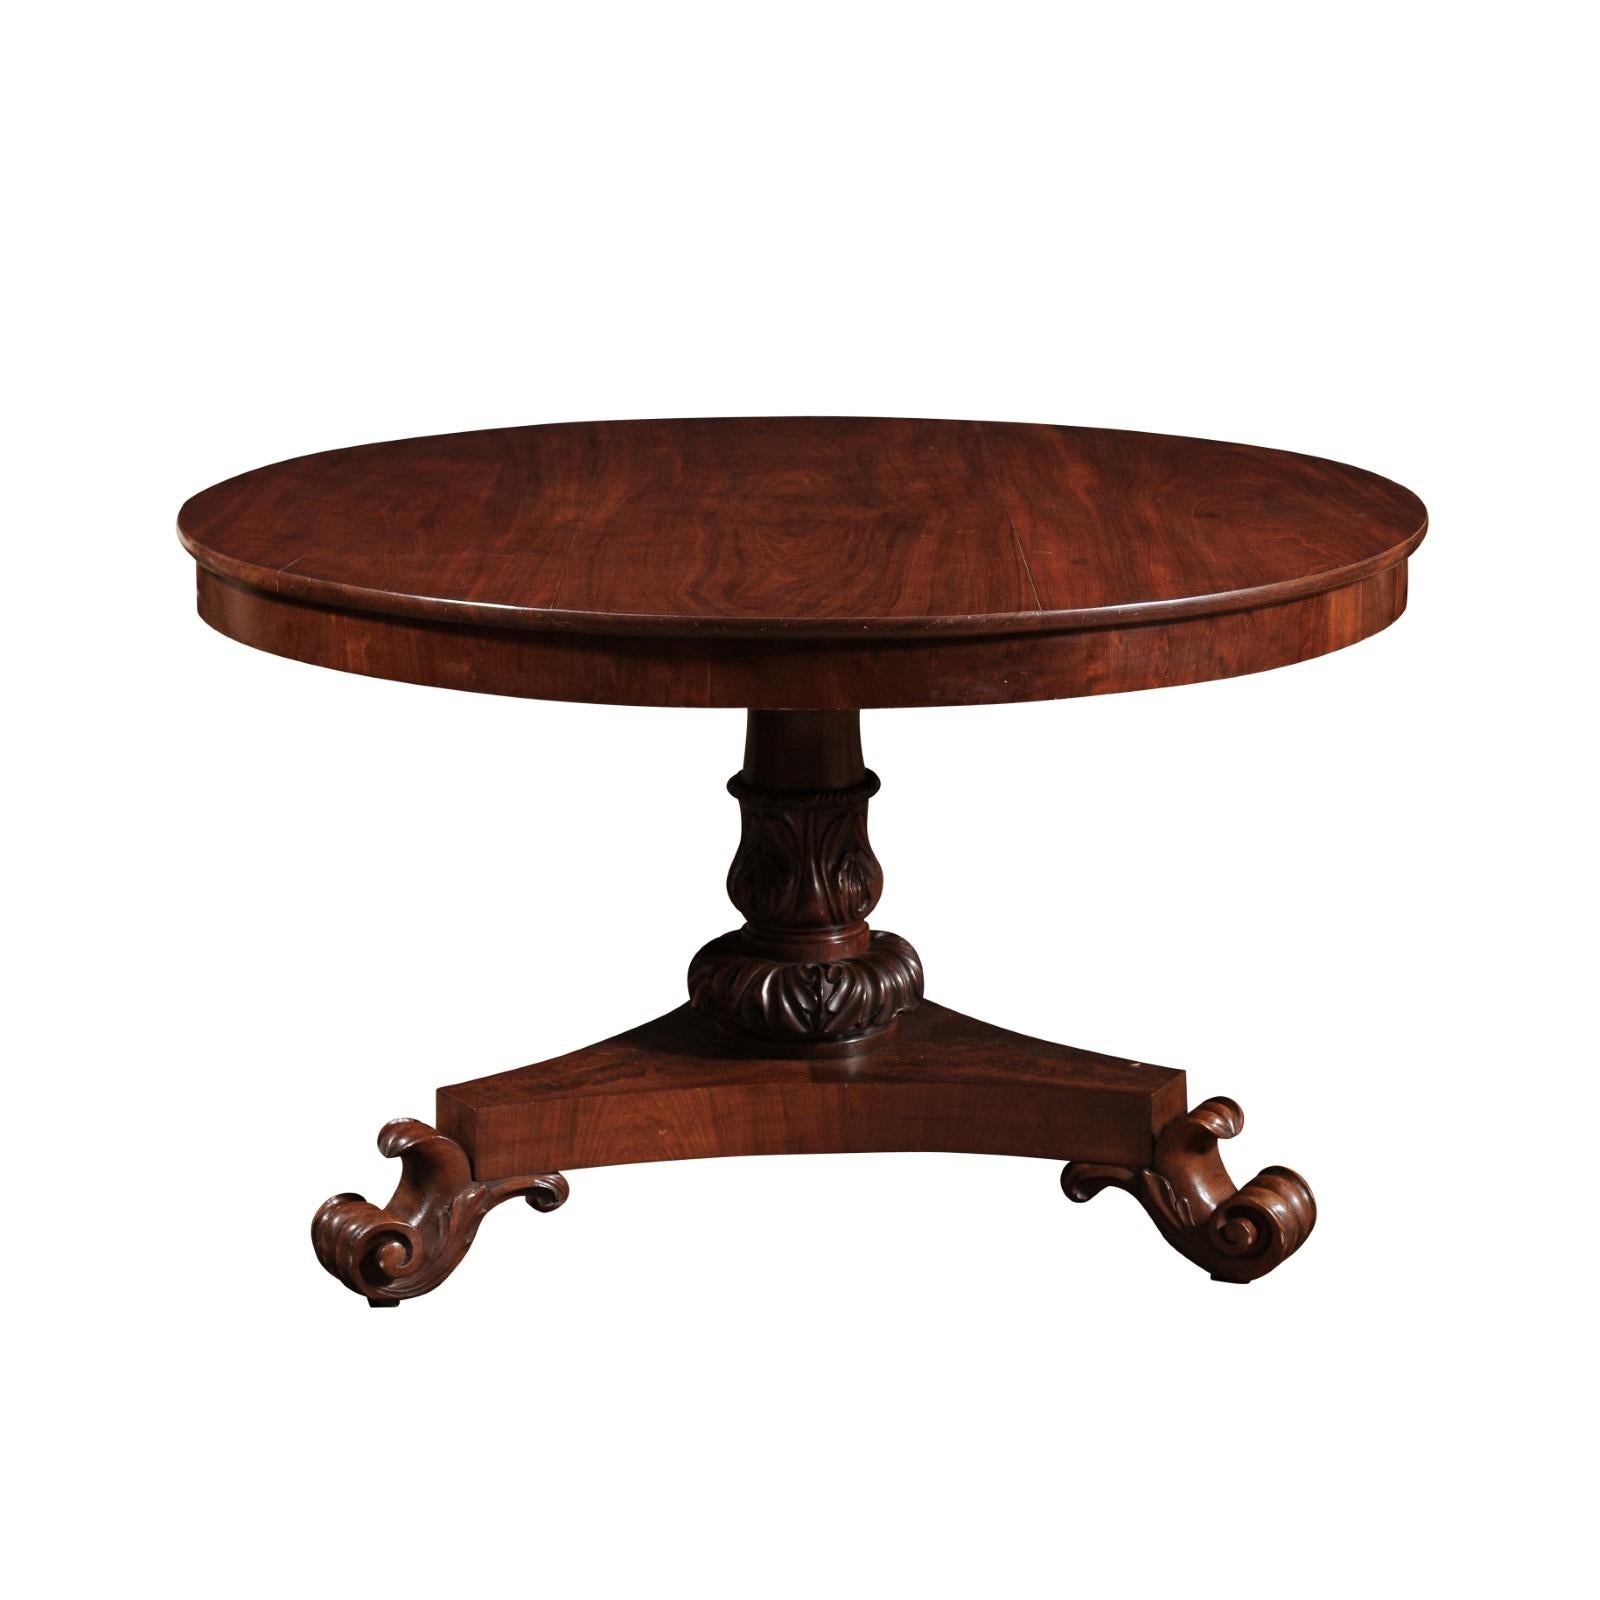  19th Century English Mahogany Center Table with Pedestal Base & Scroll Feet In Good Condition For Sale In Atlanta, GA